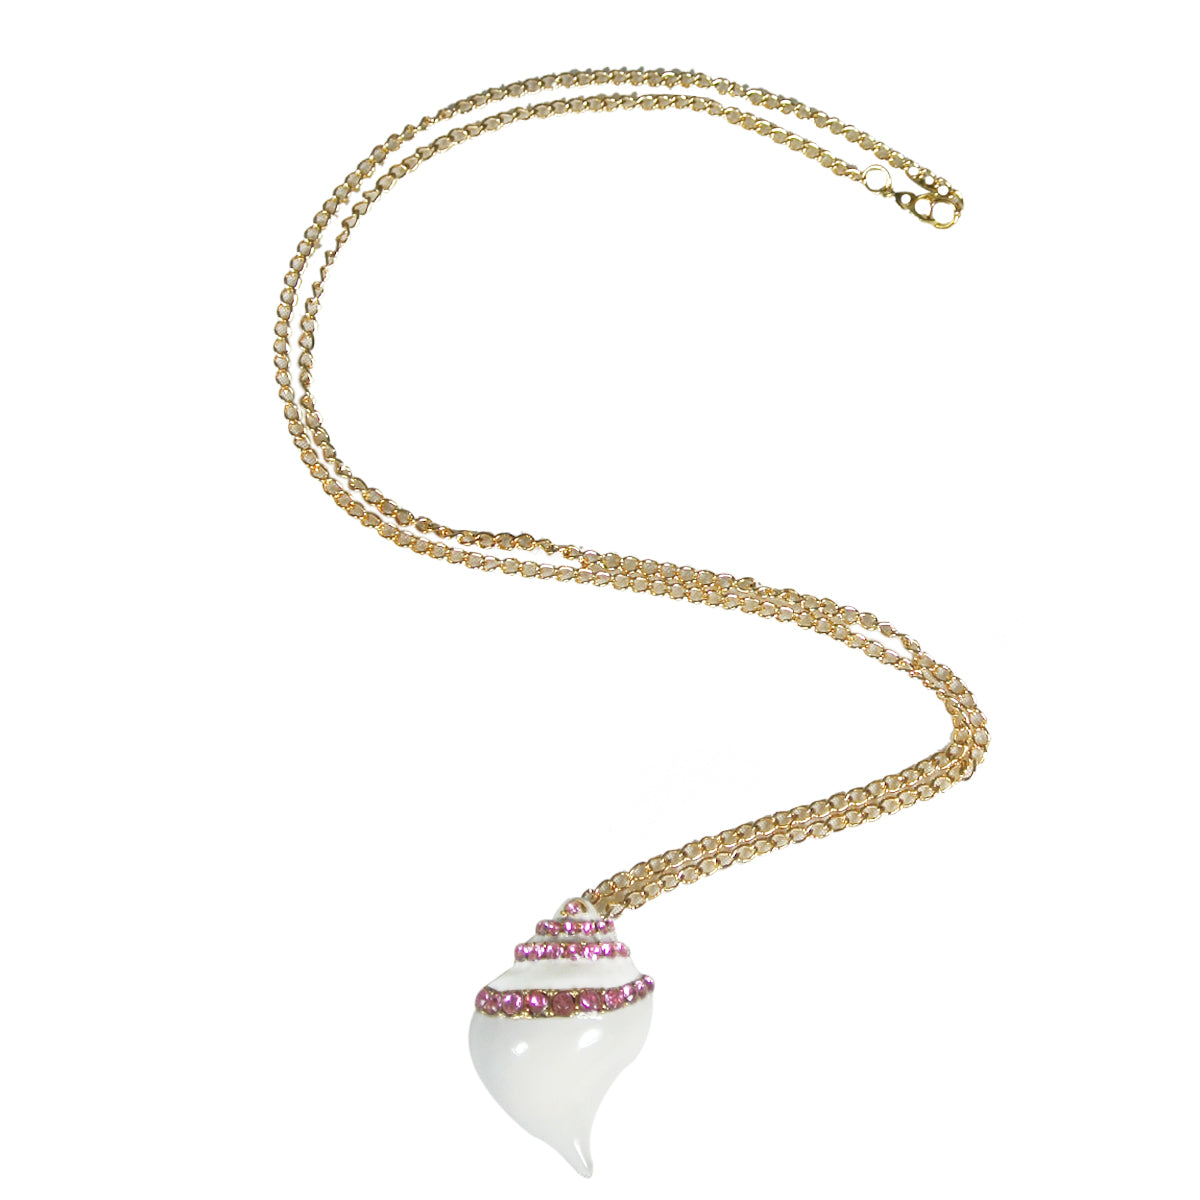 Conch Seashell Pendant Necklace with Pink Crystals